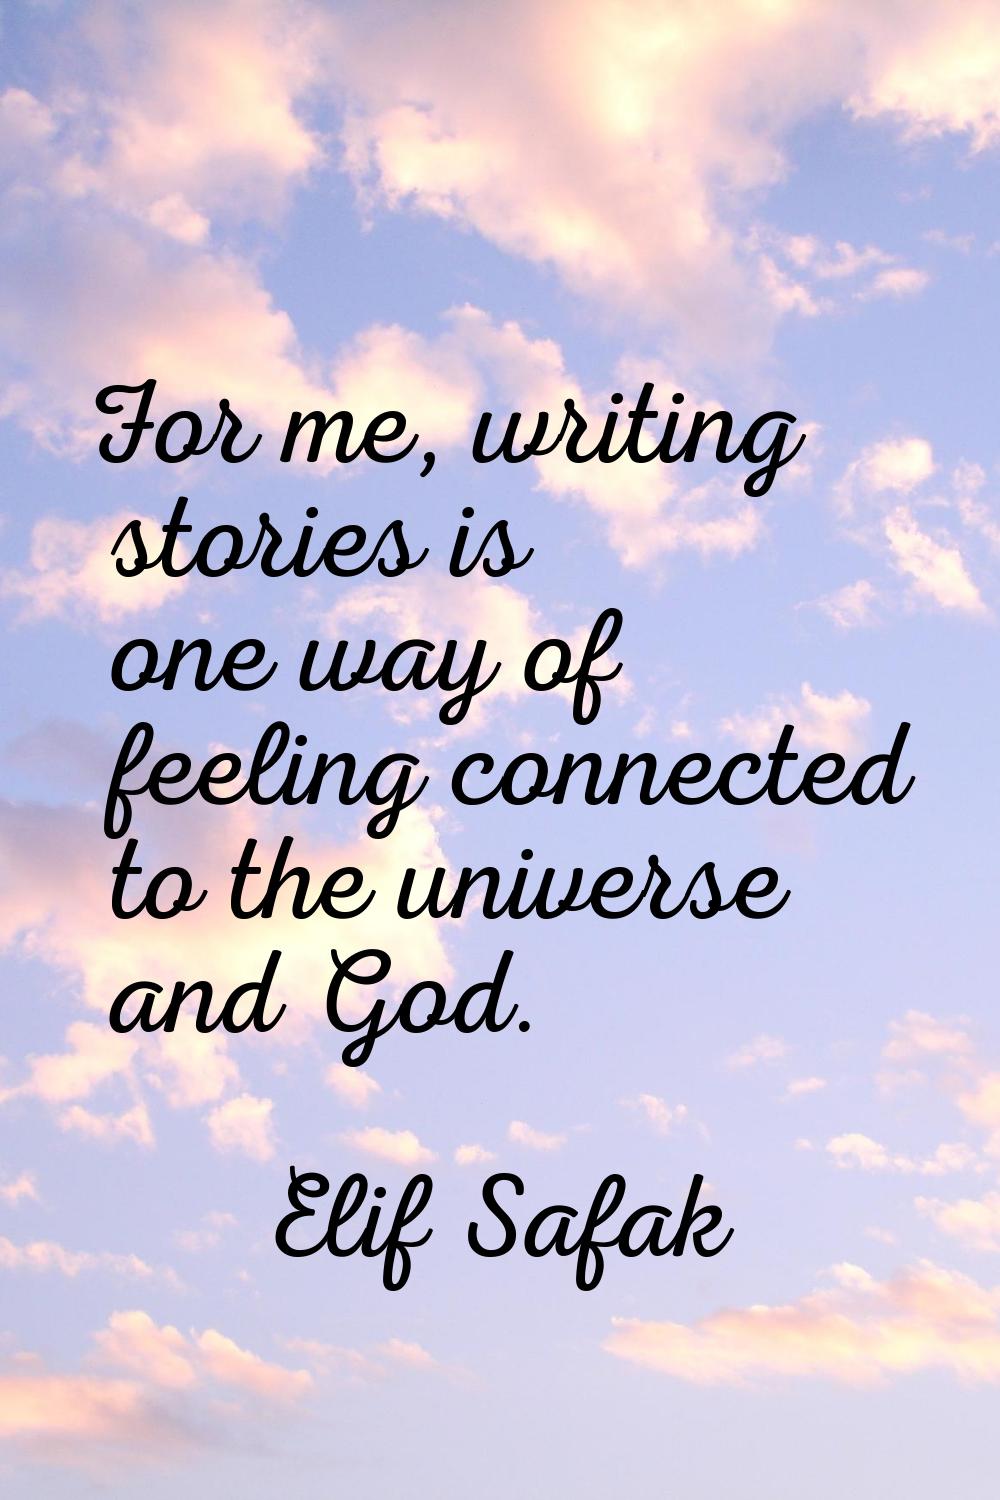 For me, writing stories is one way of feeling connected to the universe and God.